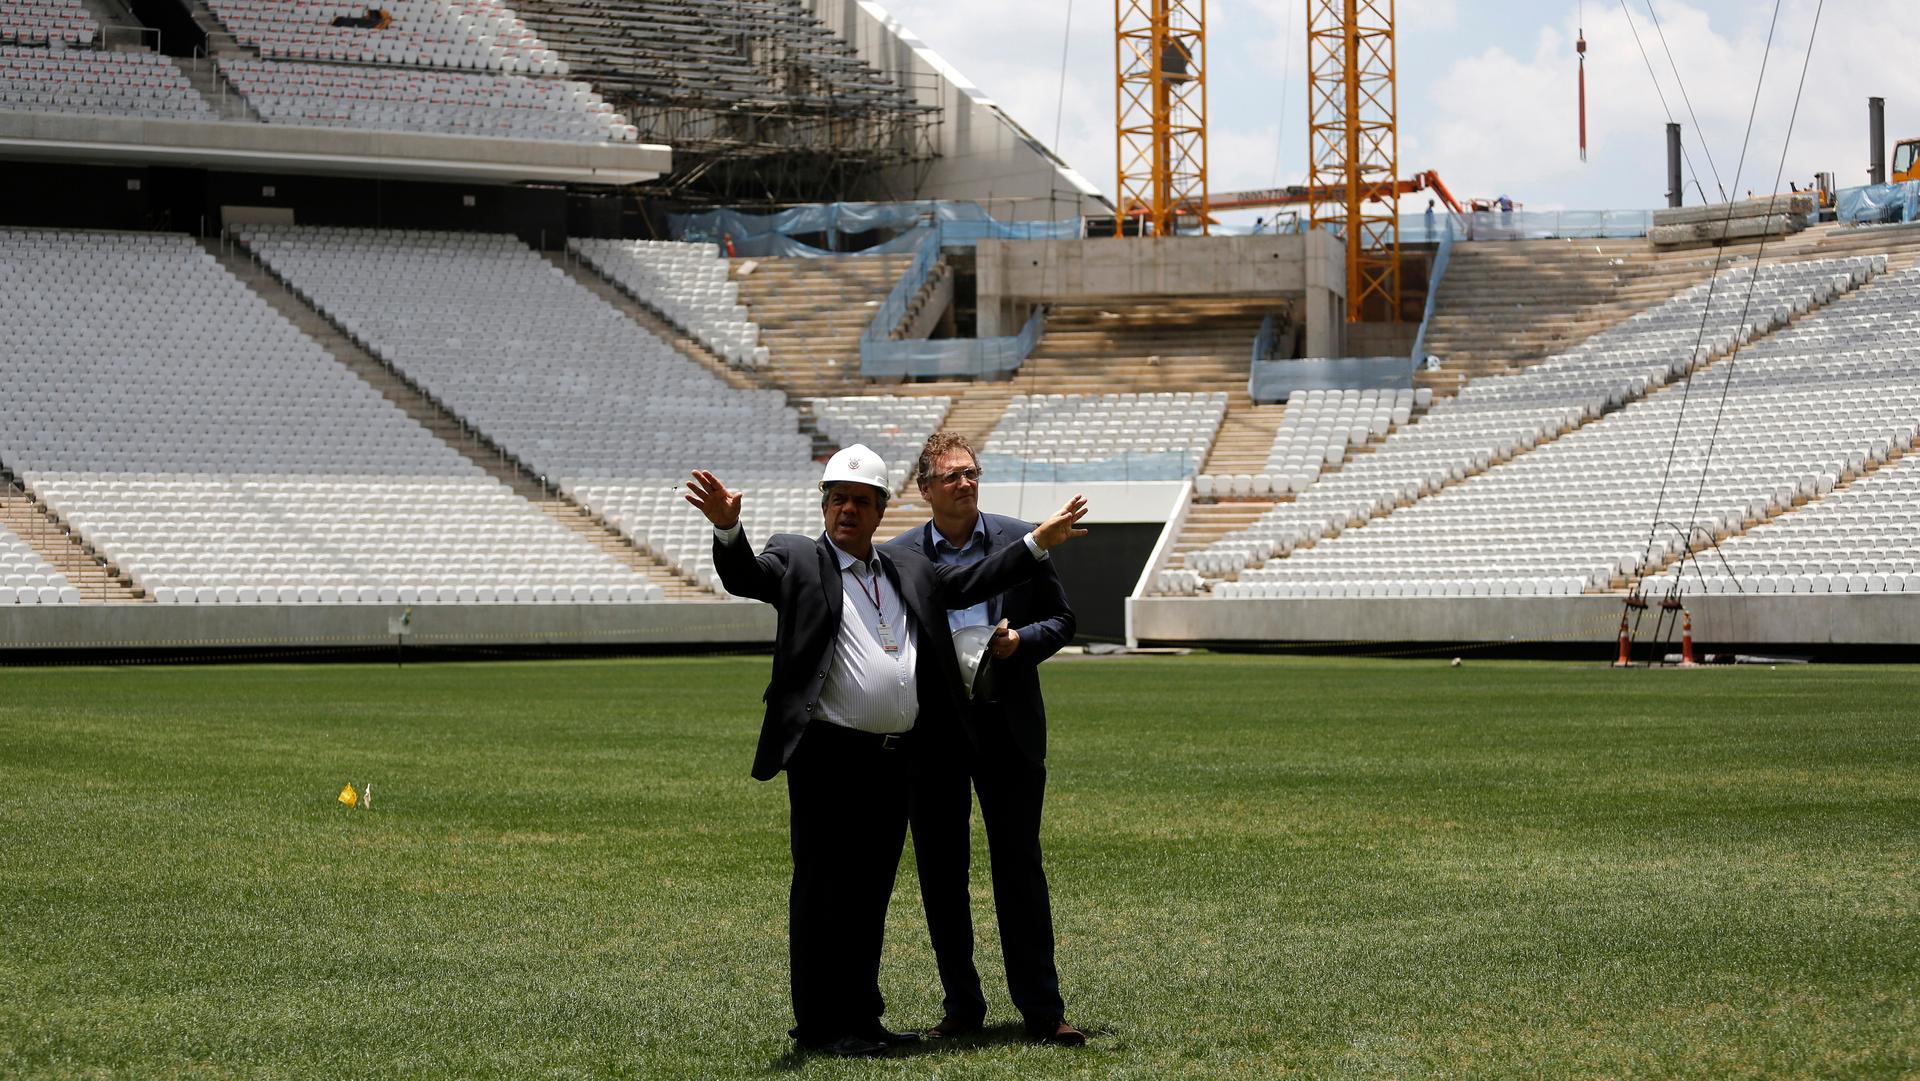 FIFA official and engineer inspect stadium in Sao Paulo, Brazil